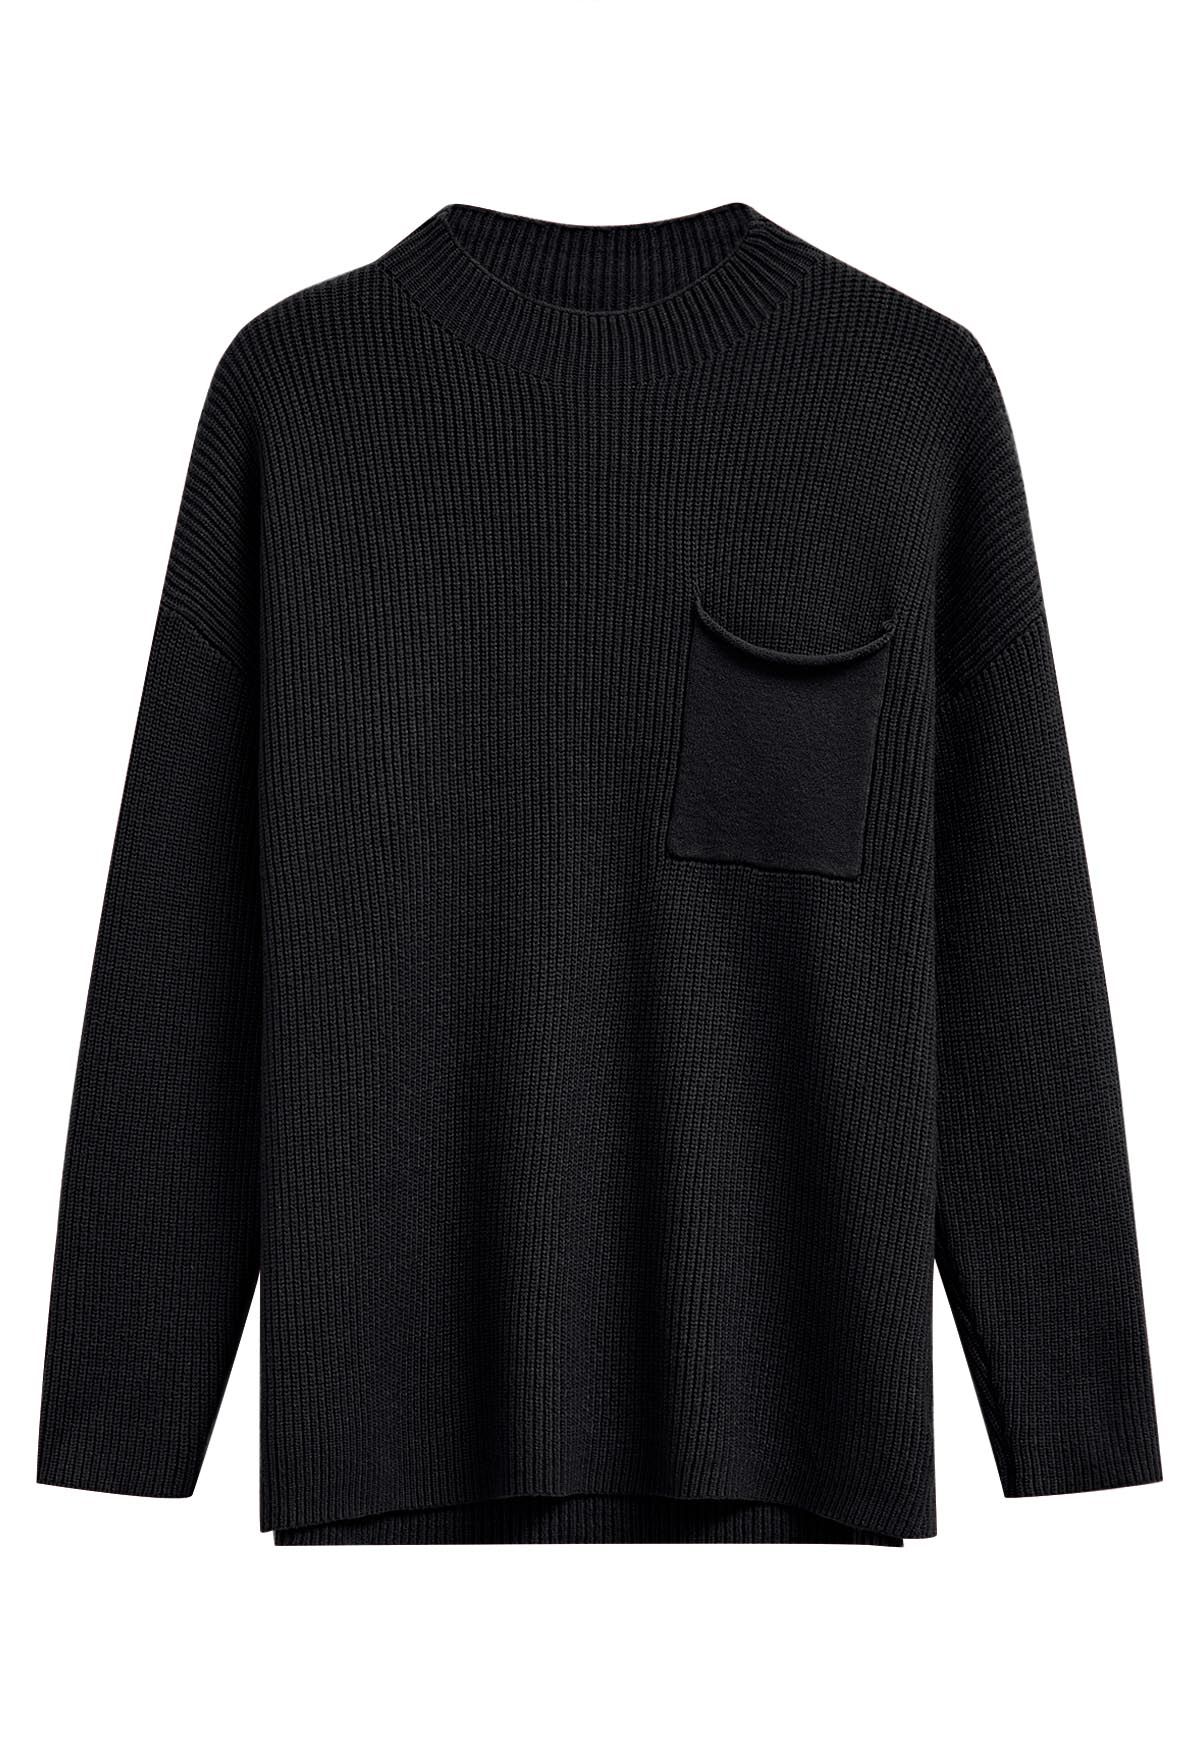 Patch Pocket Ribbed Knit Sweater in Black